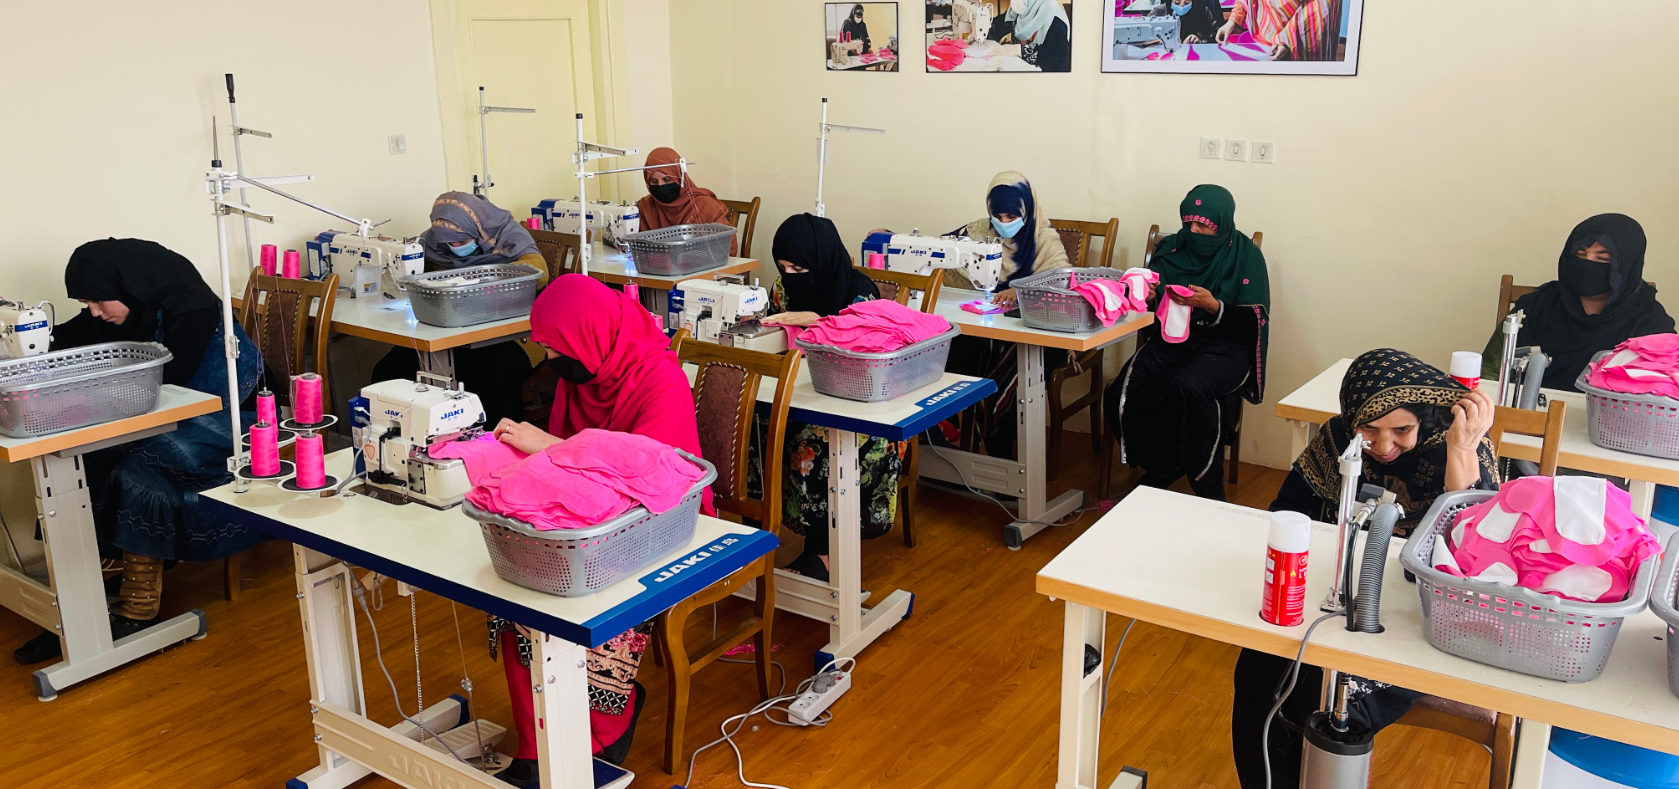 Fifty women are being engaged through this project, boosting their earnings and skills. 